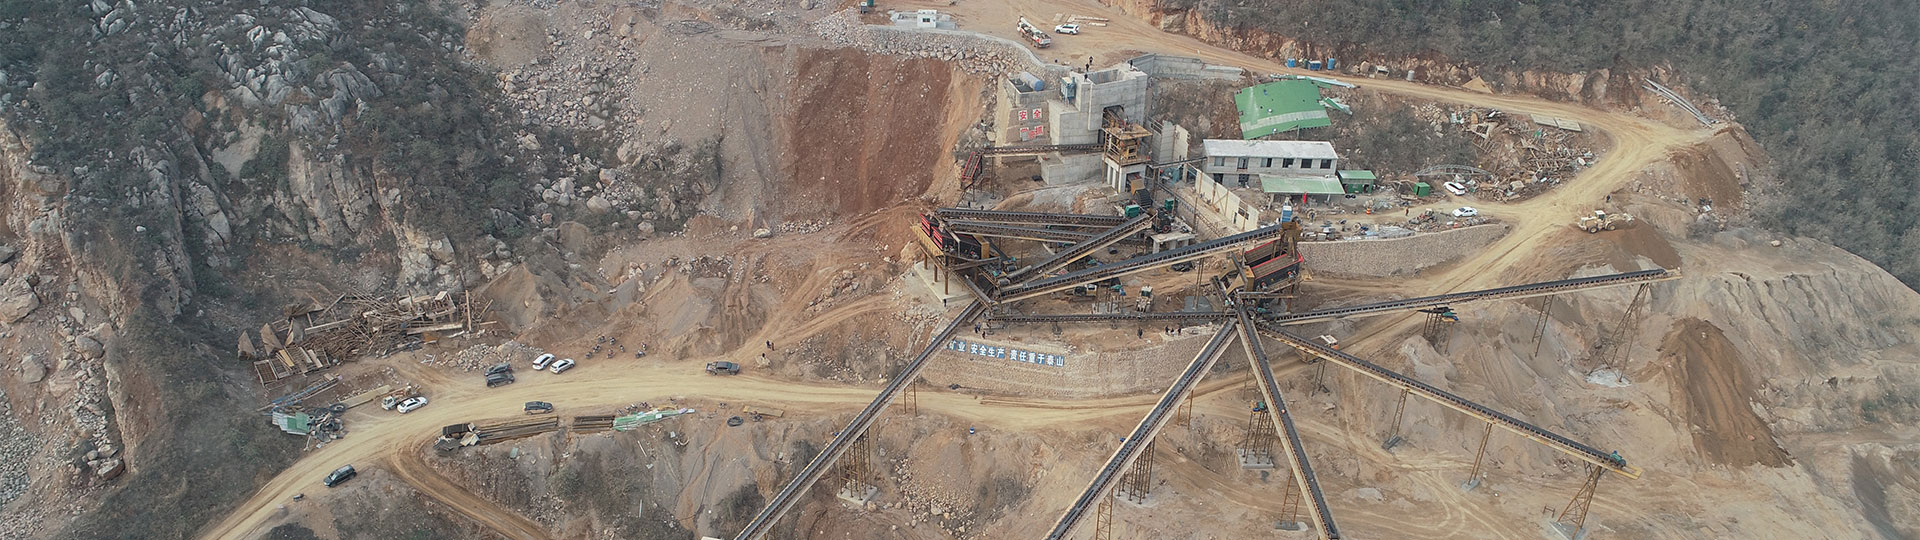 1500tph limestone crushing production line in Sinkiang